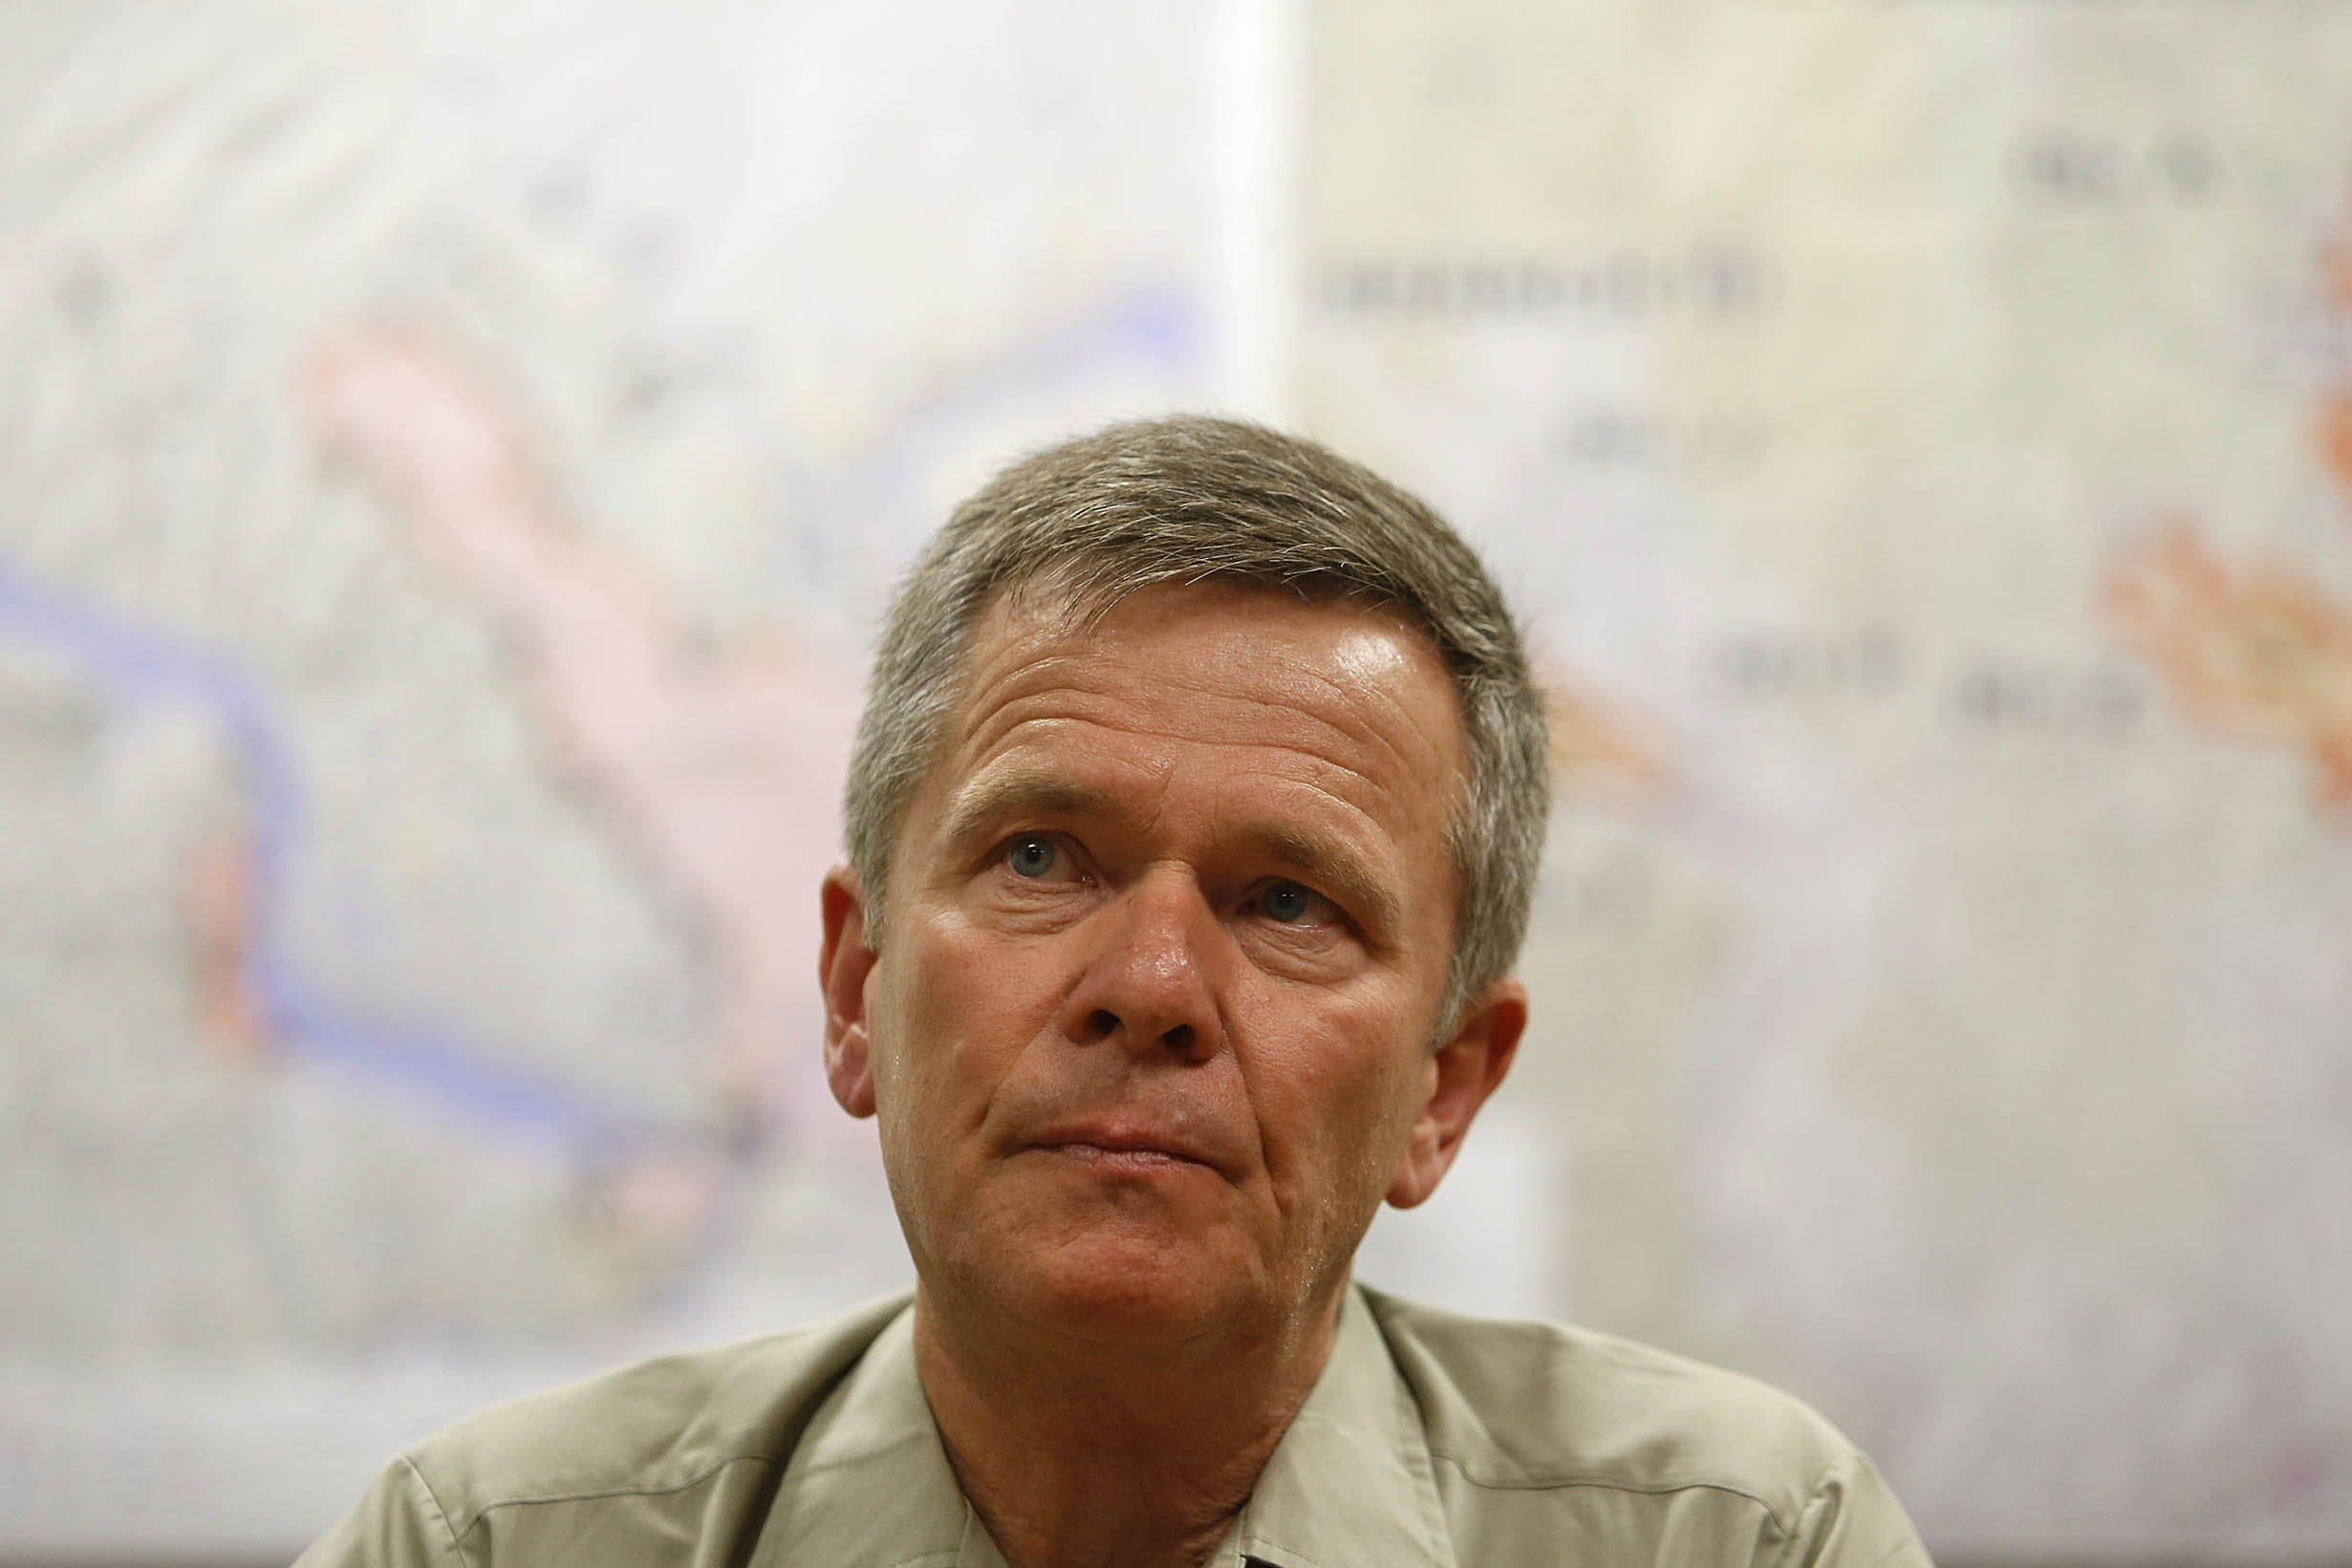  John Phipps, lead of the Coordinated Response Protocol, discusses limited details pertaining to the three firefighters who lost their lives in the Twisp River Fire, at the Okanogan-Wenatchee National Forest Headquarters in Wenatchee, Wash., Sunday, 